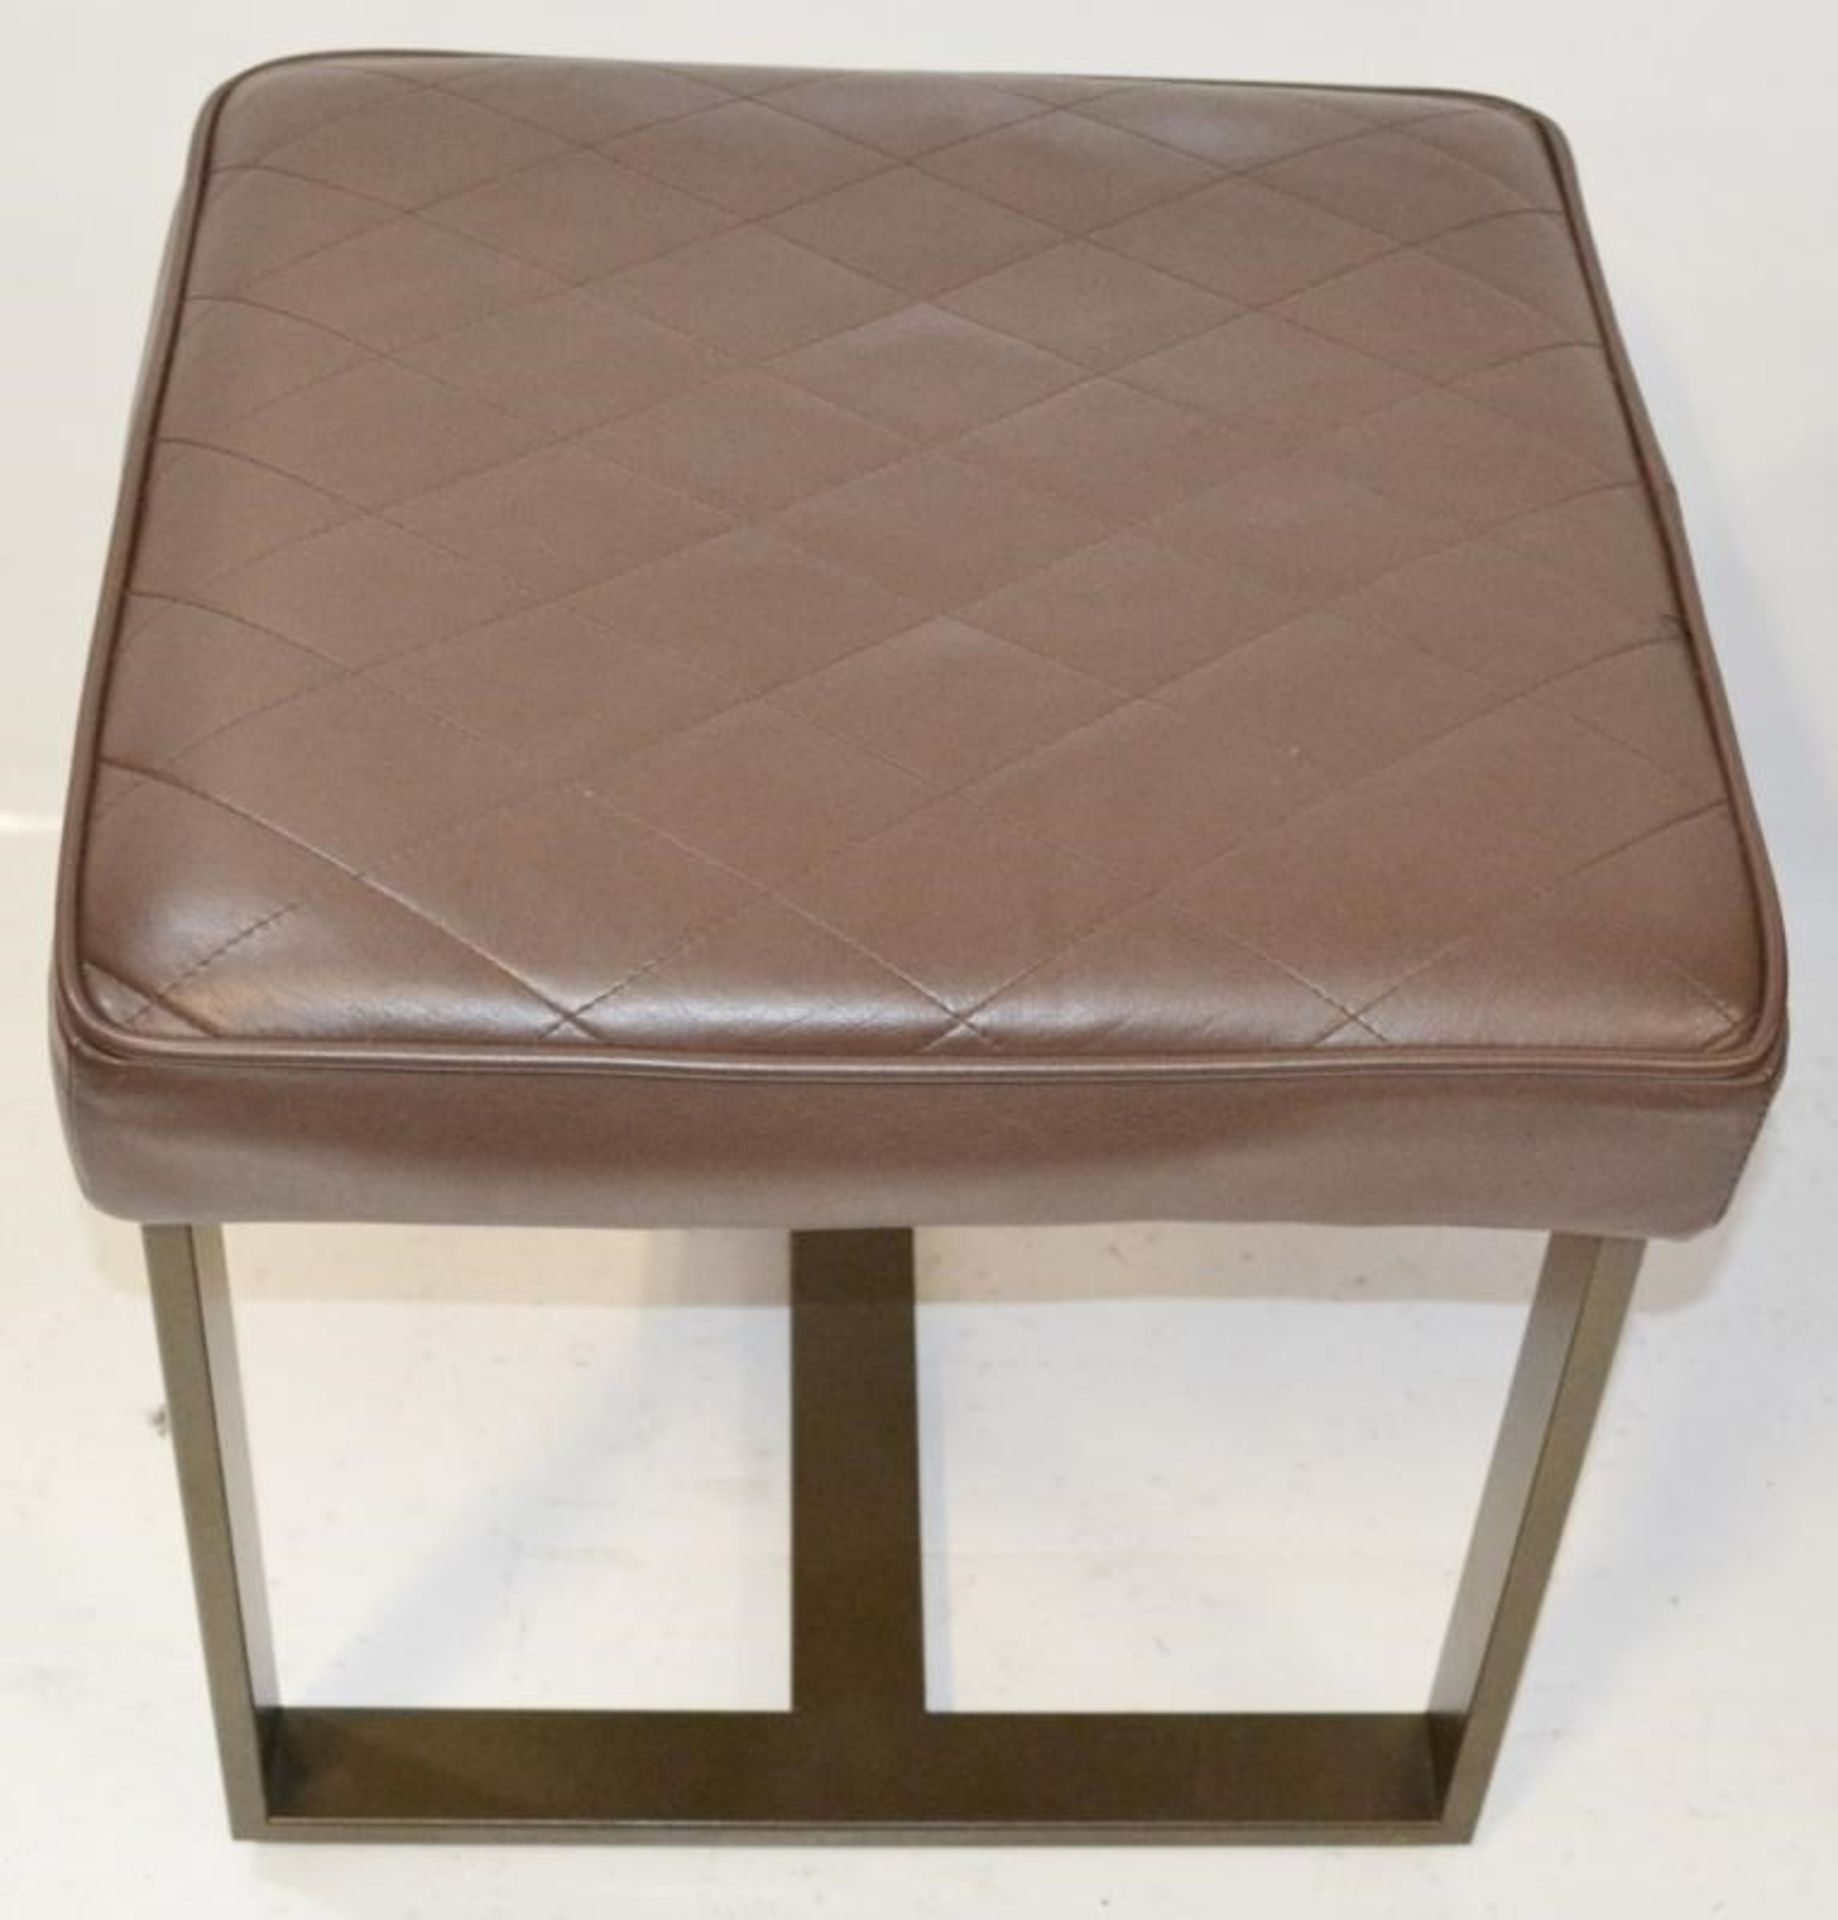 2 x Contemporary Seat Stools With Brown Faux Leather Cushioned Seat Pads - Image 2 of 5